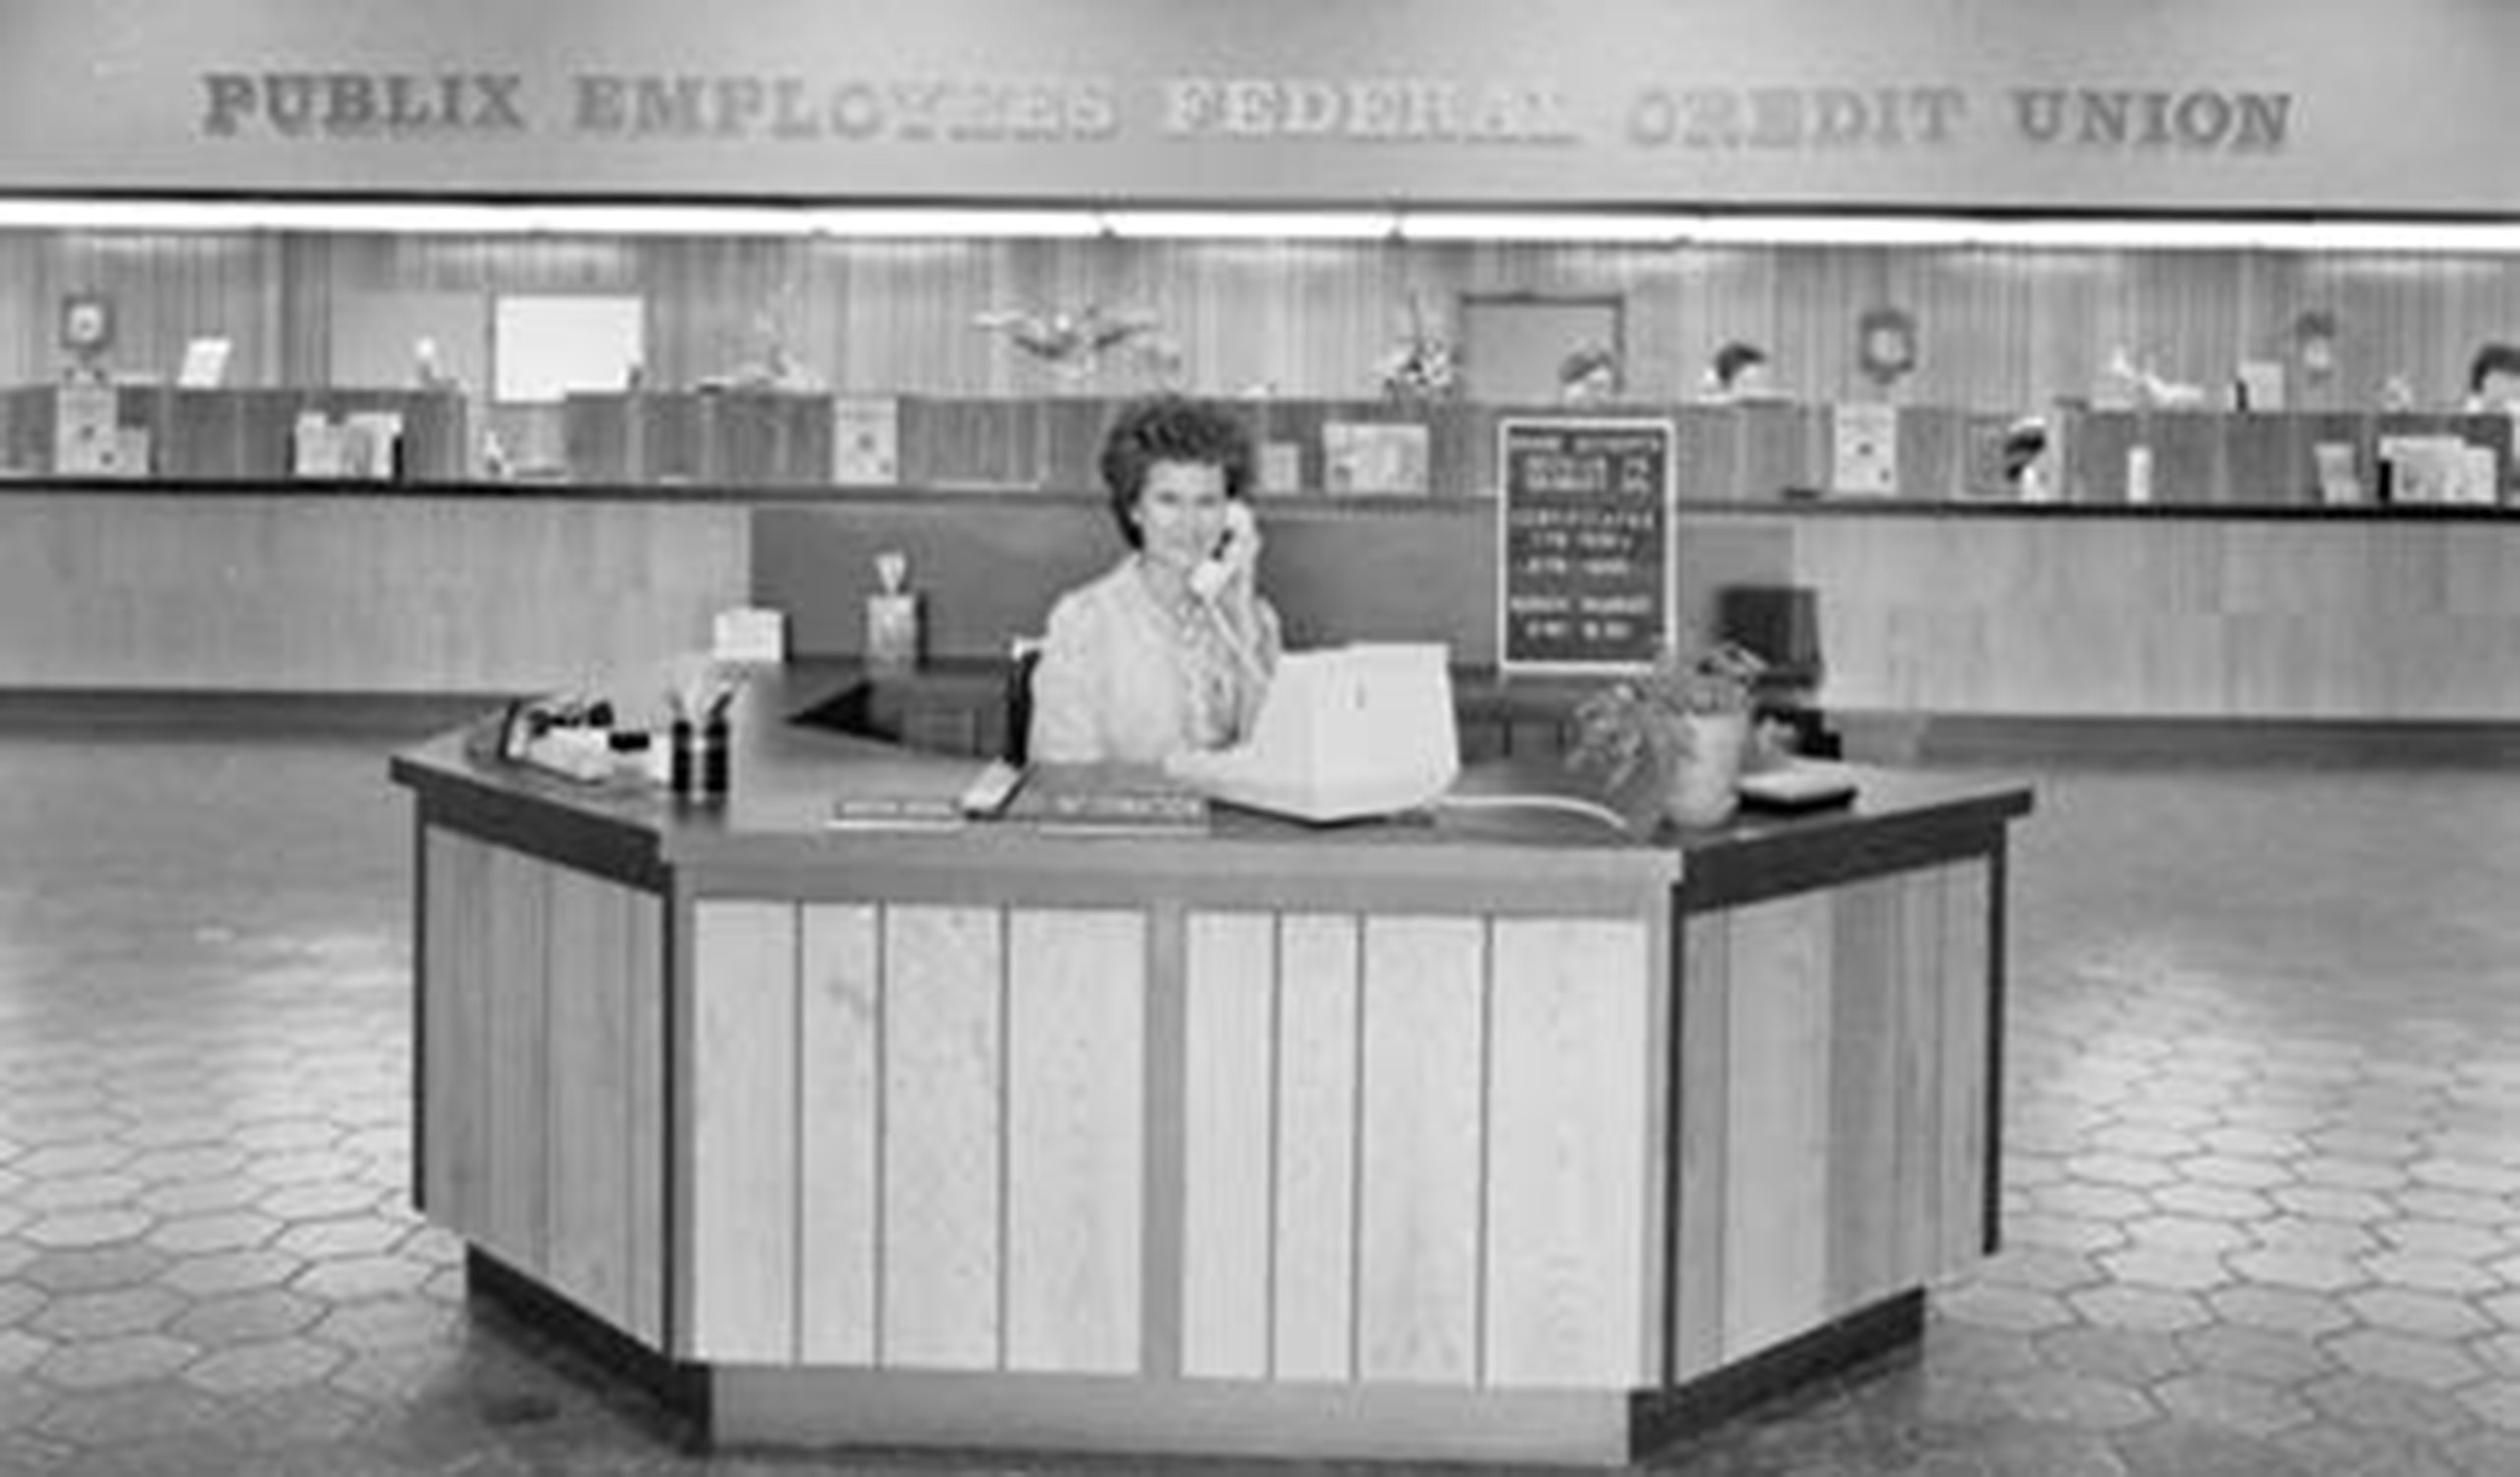 PEFCU History: A Look Back in Time